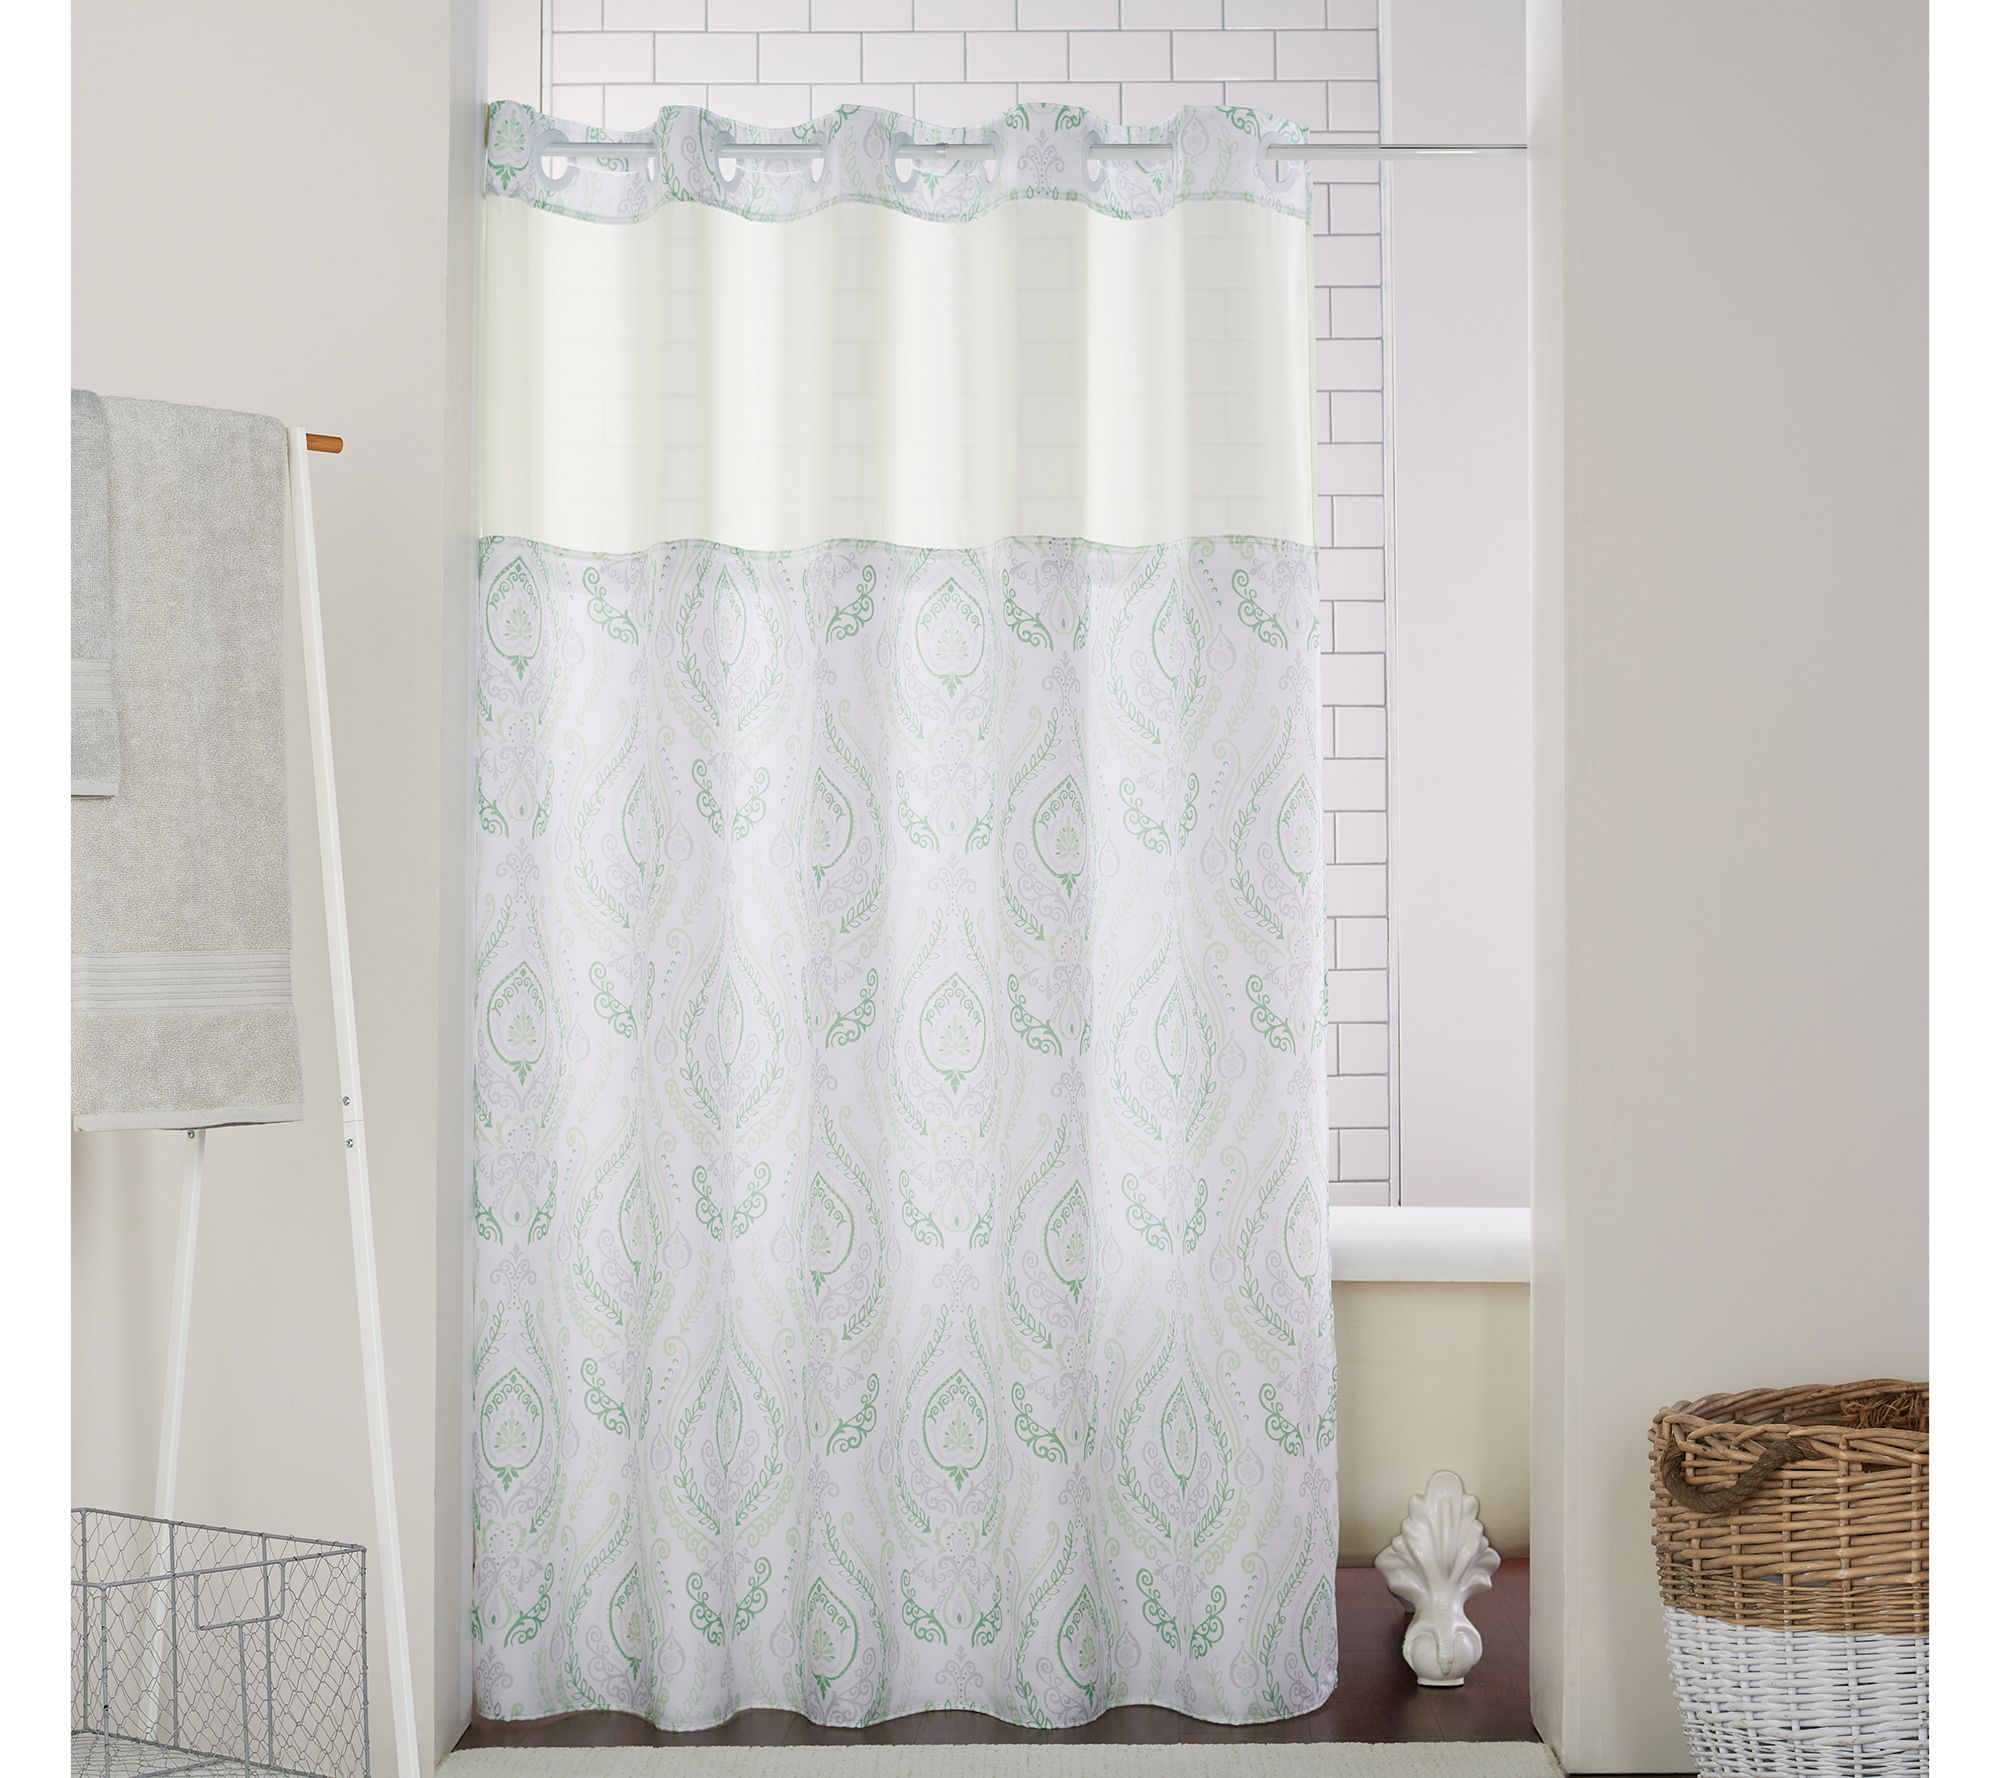 Hookless French Damask Shower Curtain, How To Install Hookless Shower Curtain